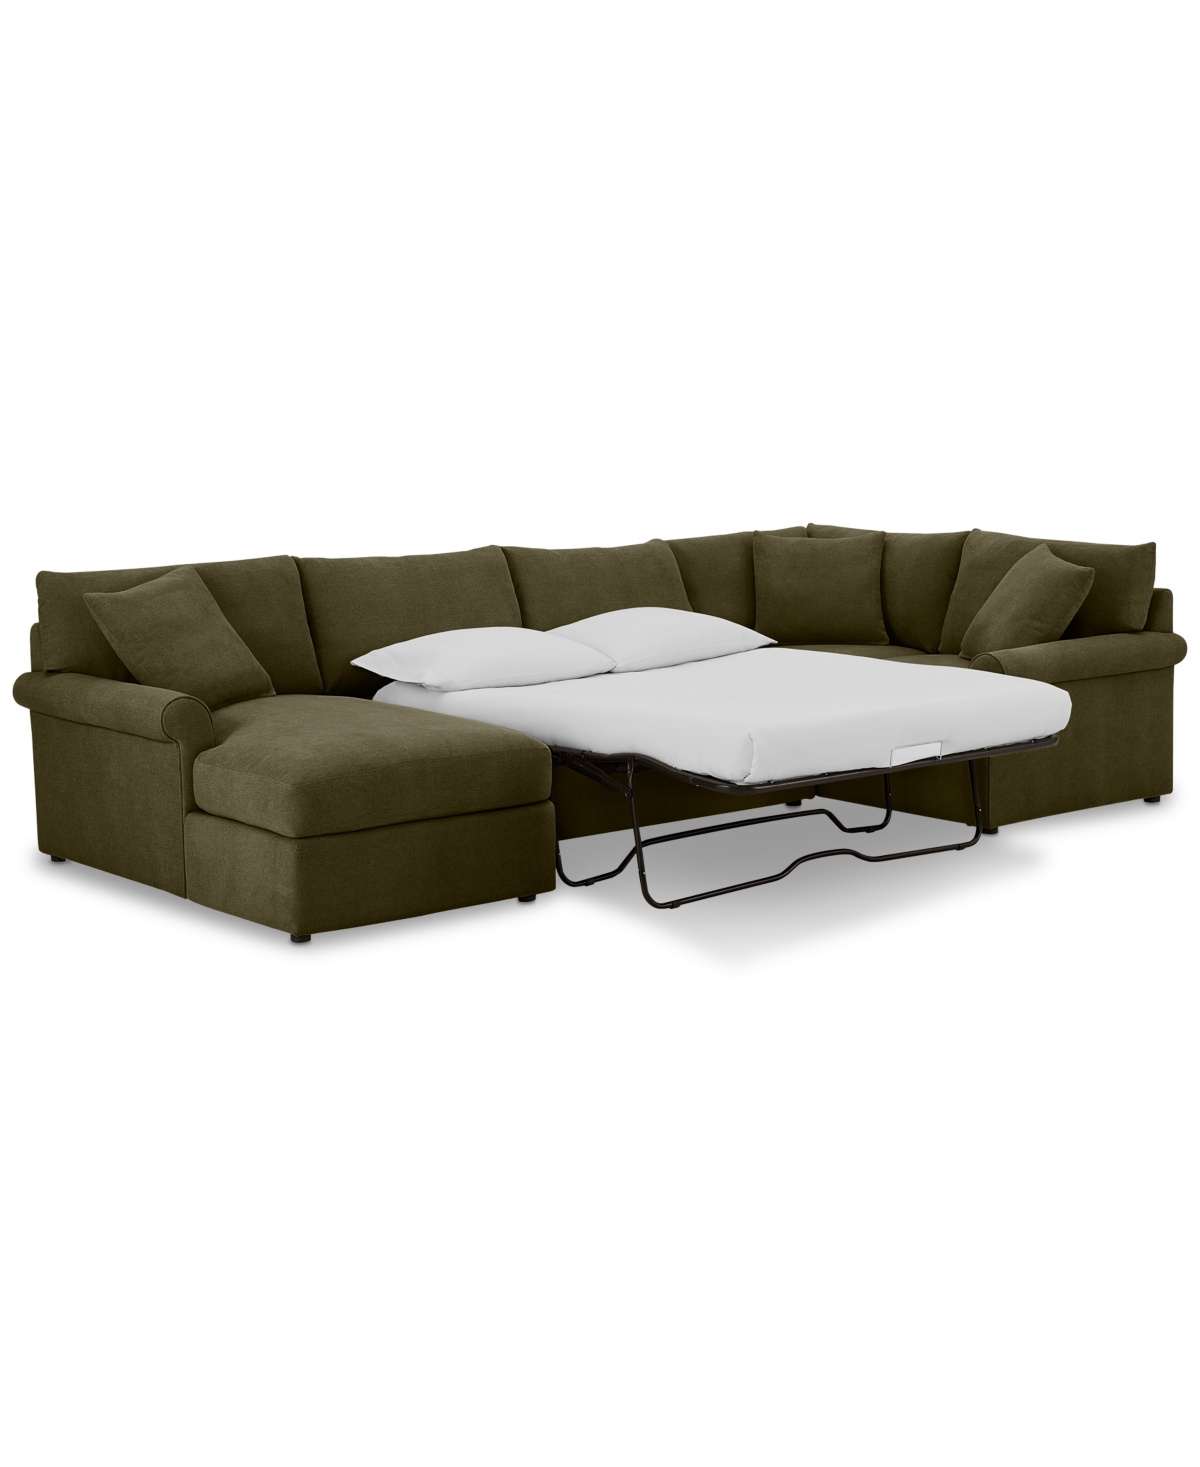 Furniture Wrenley 138" 4-pc. Fabric Modular Chaise Sleeper Sectional Sofa, Created For Macy's In Olive